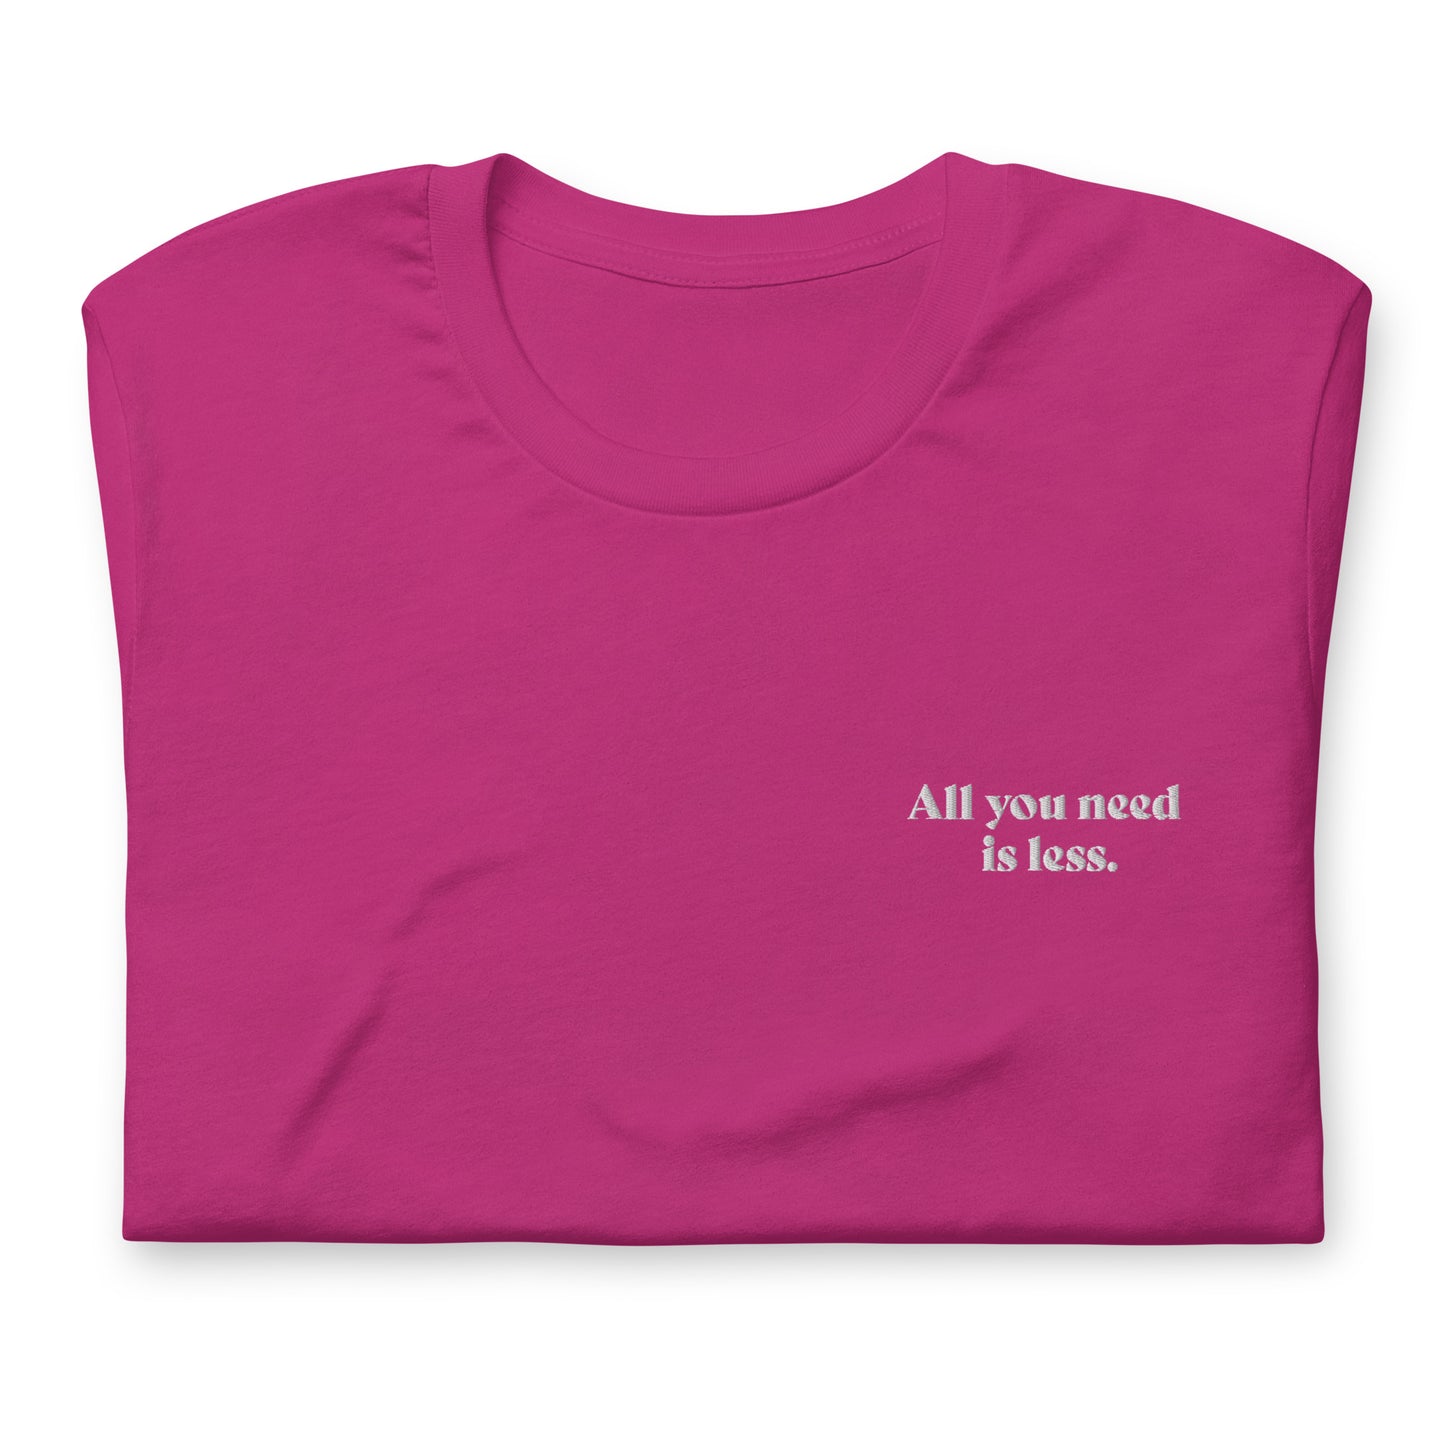 All you need is less. - embroidered T-shirt